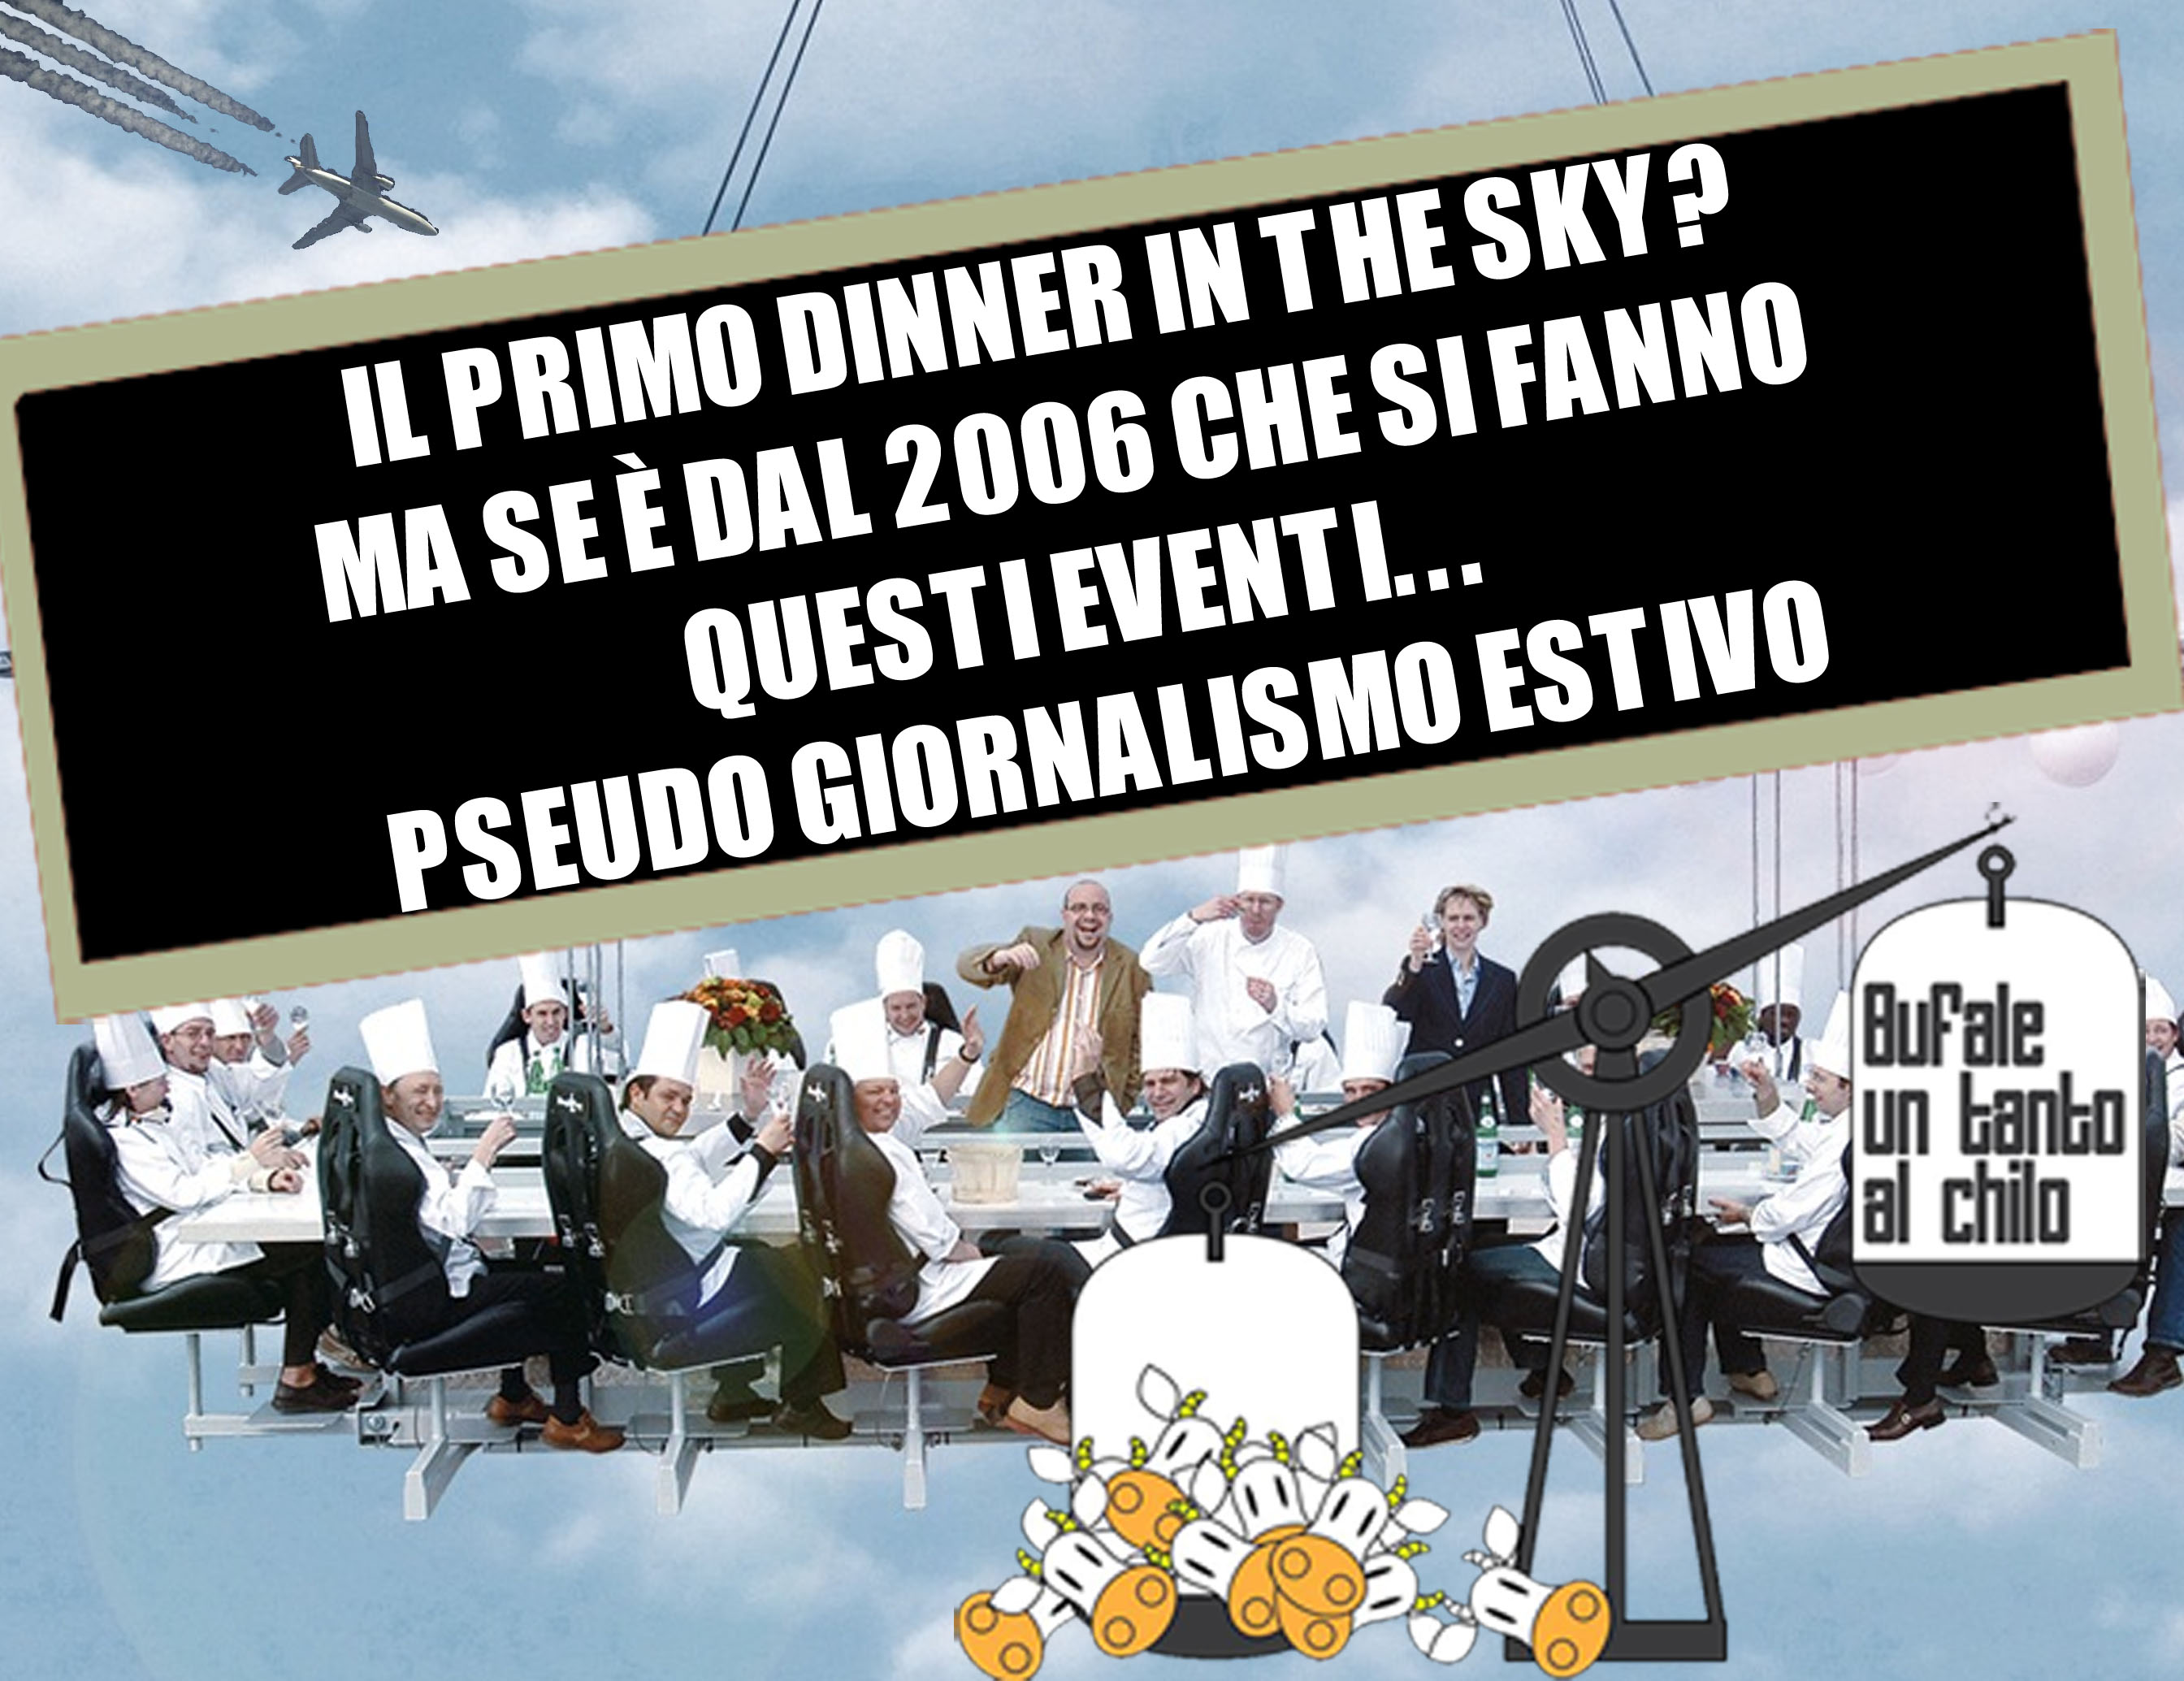 dinnersky-withchemtrails